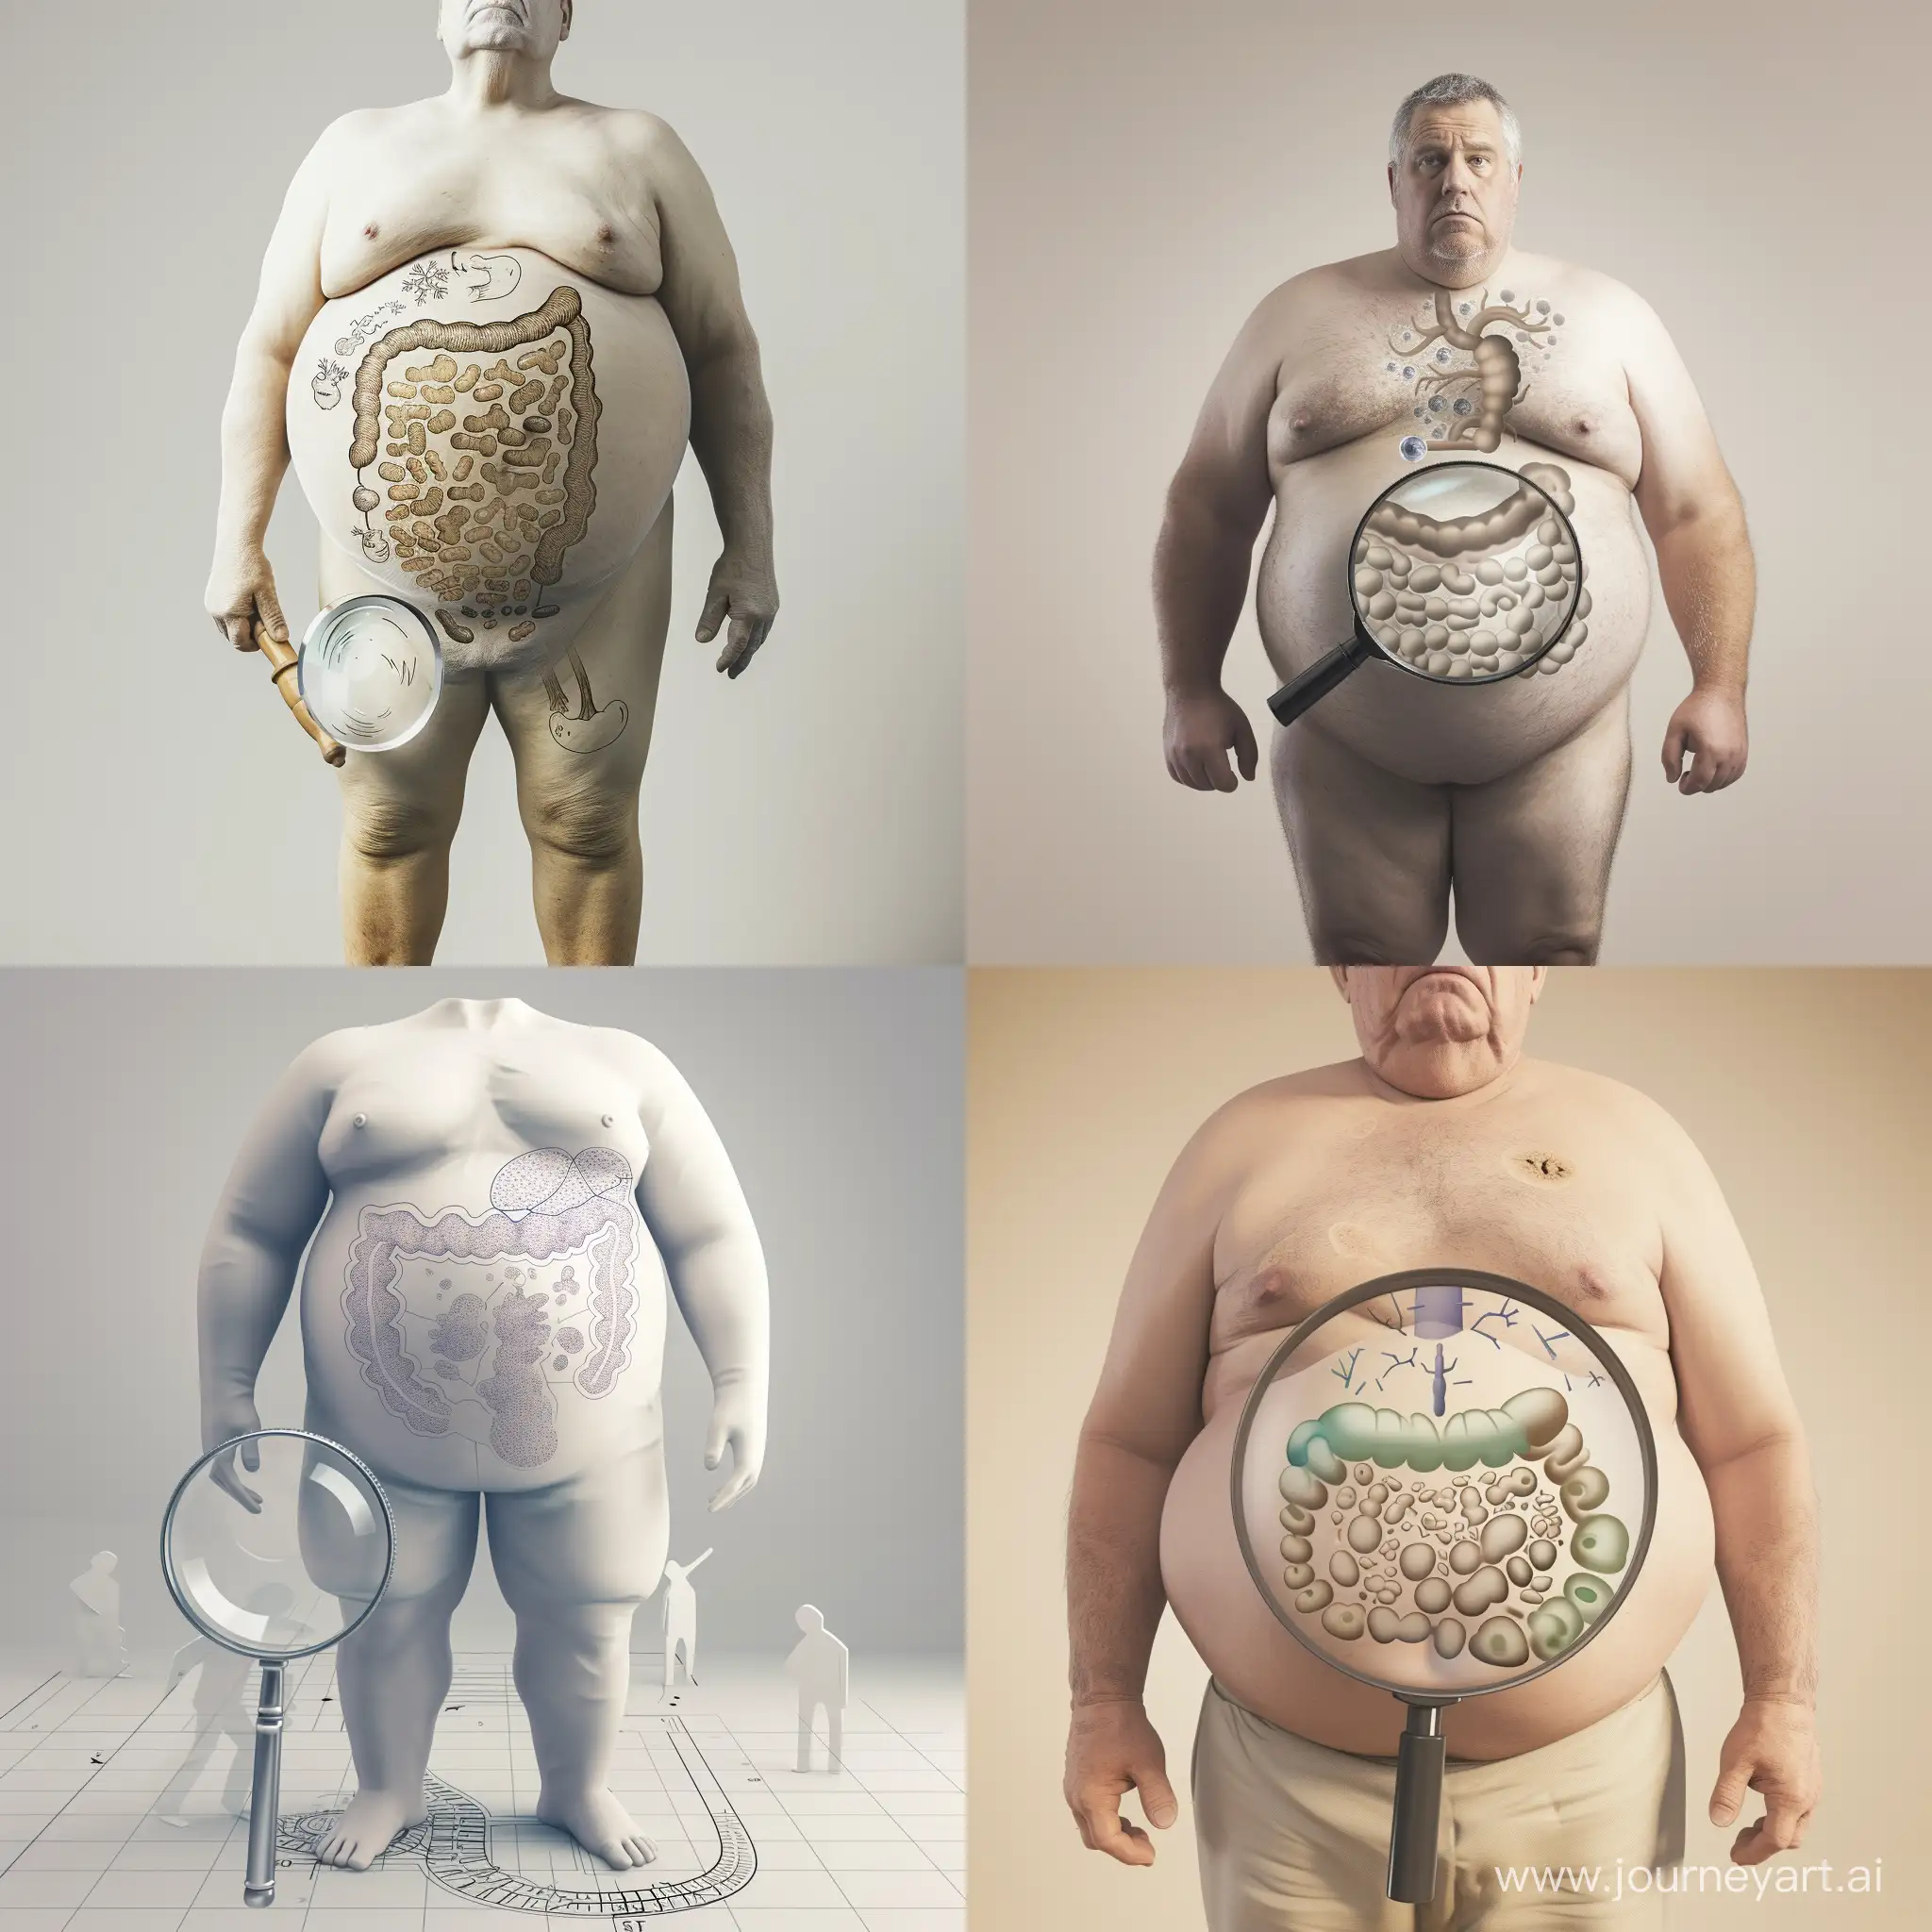 Obese-Person-with-Magnifying-Glass-Showing-Gut-Microbiome